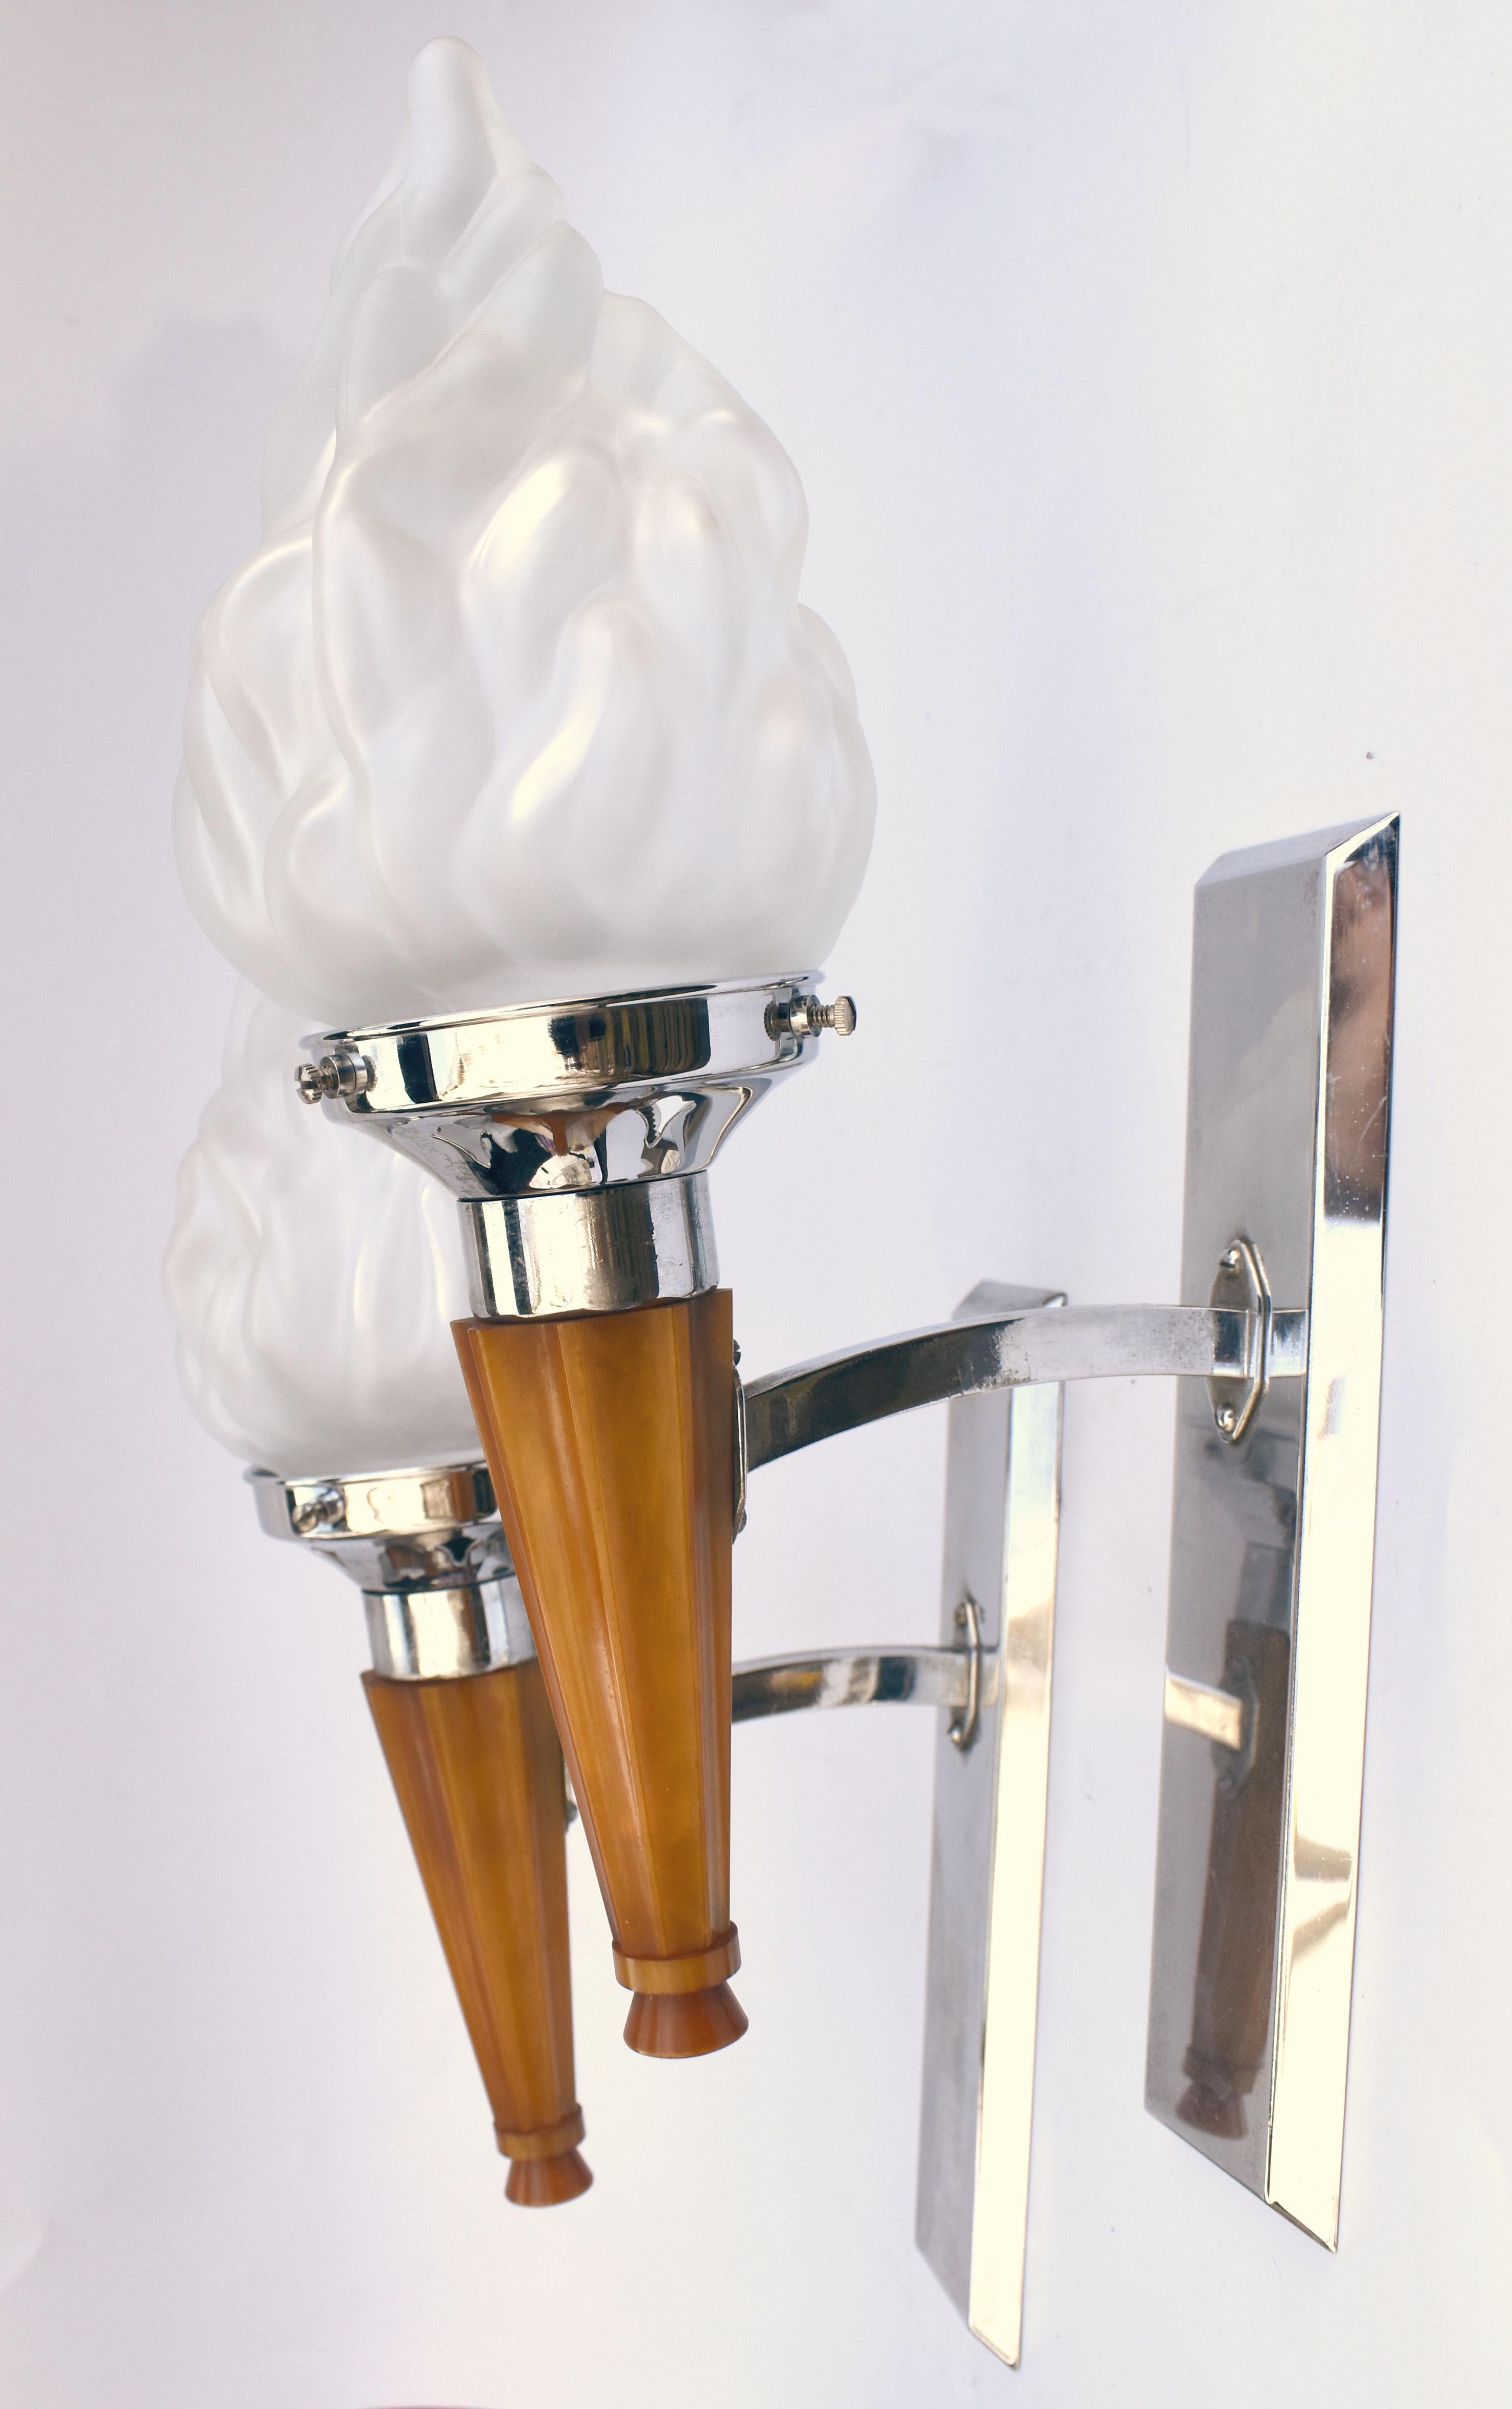 Art Deco Pair of Matching Flame Wall Light Sconces, Circa 1930's For Sale 3